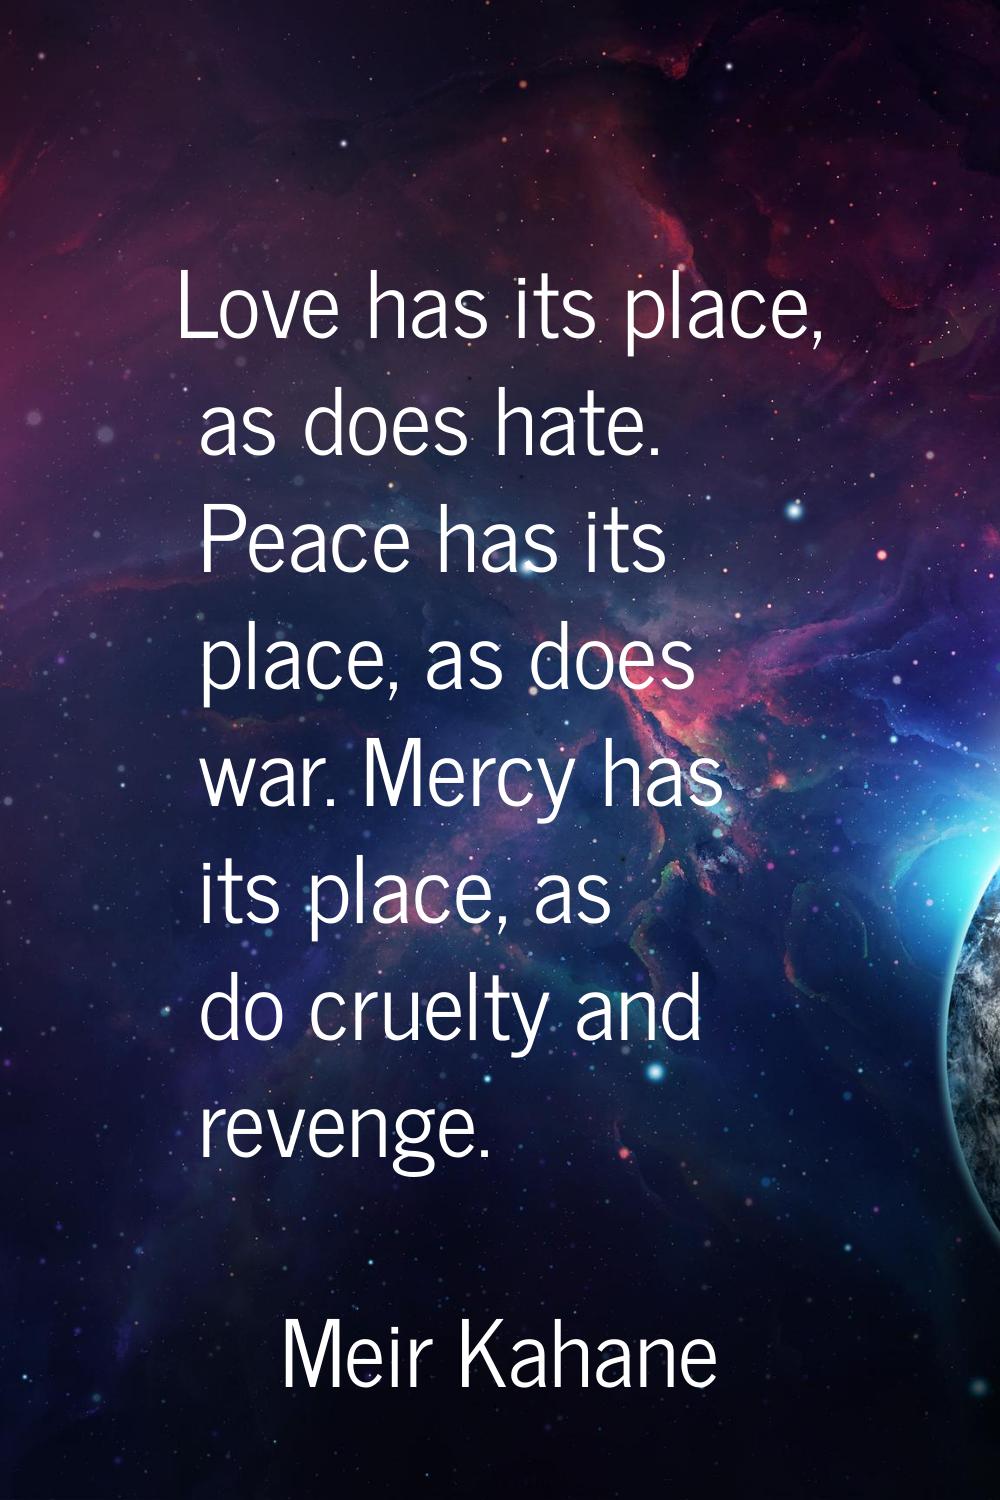 Love has its place, as does hate. Peace has its place, as does war. Mercy has its place, as do crue